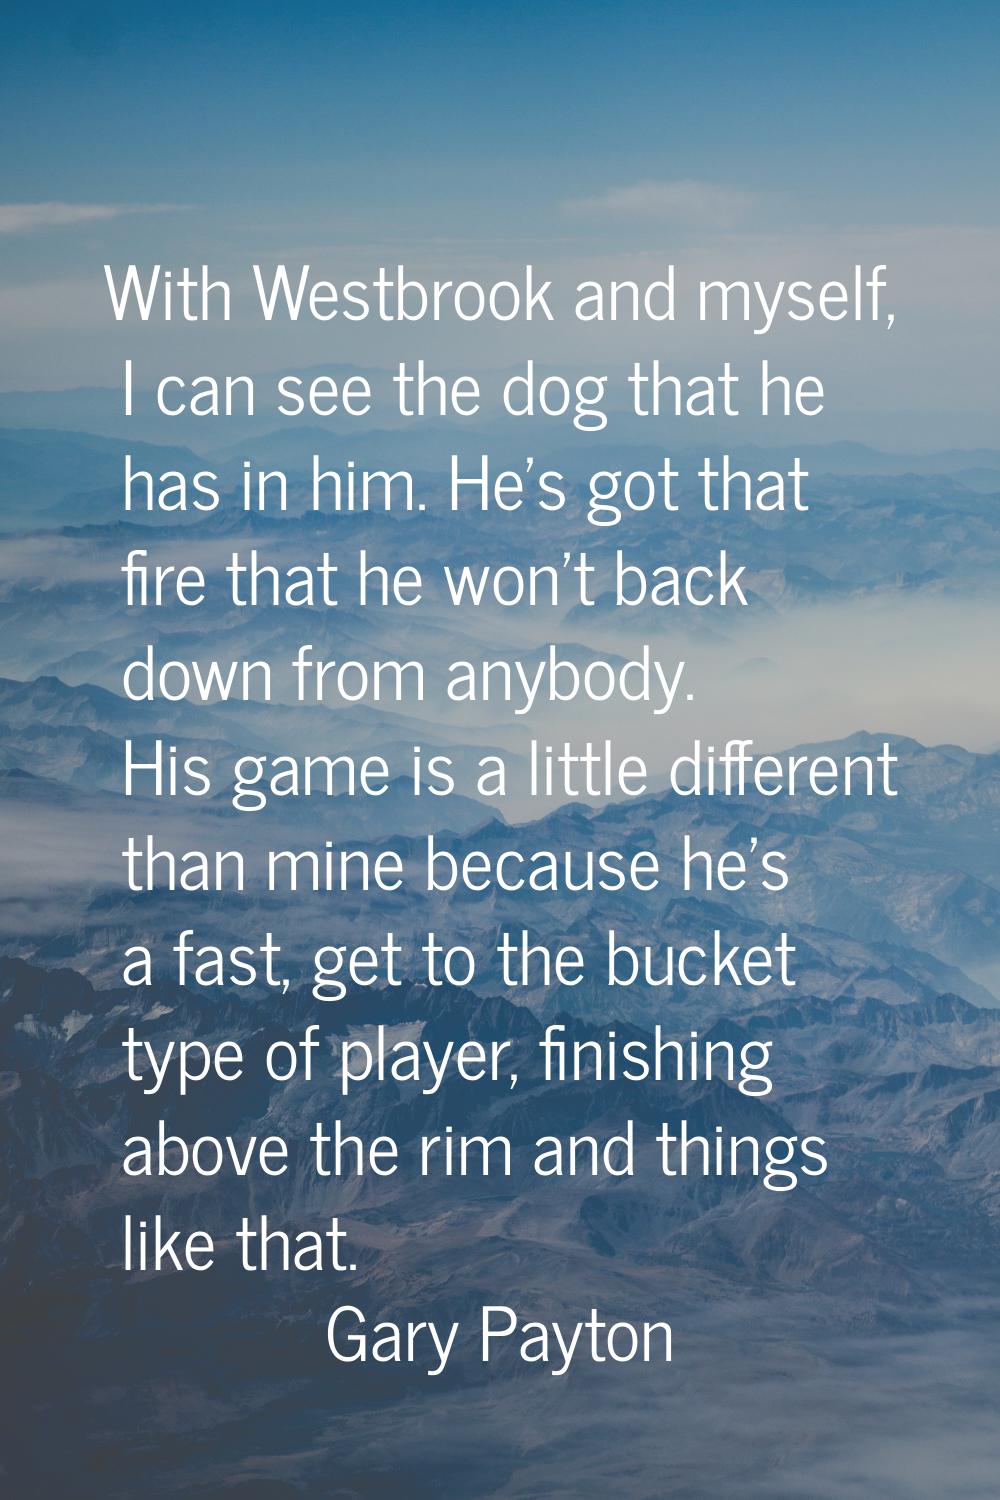 With Westbrook and myself, I can see the dog that he has in him. He's got that fire that he won't b